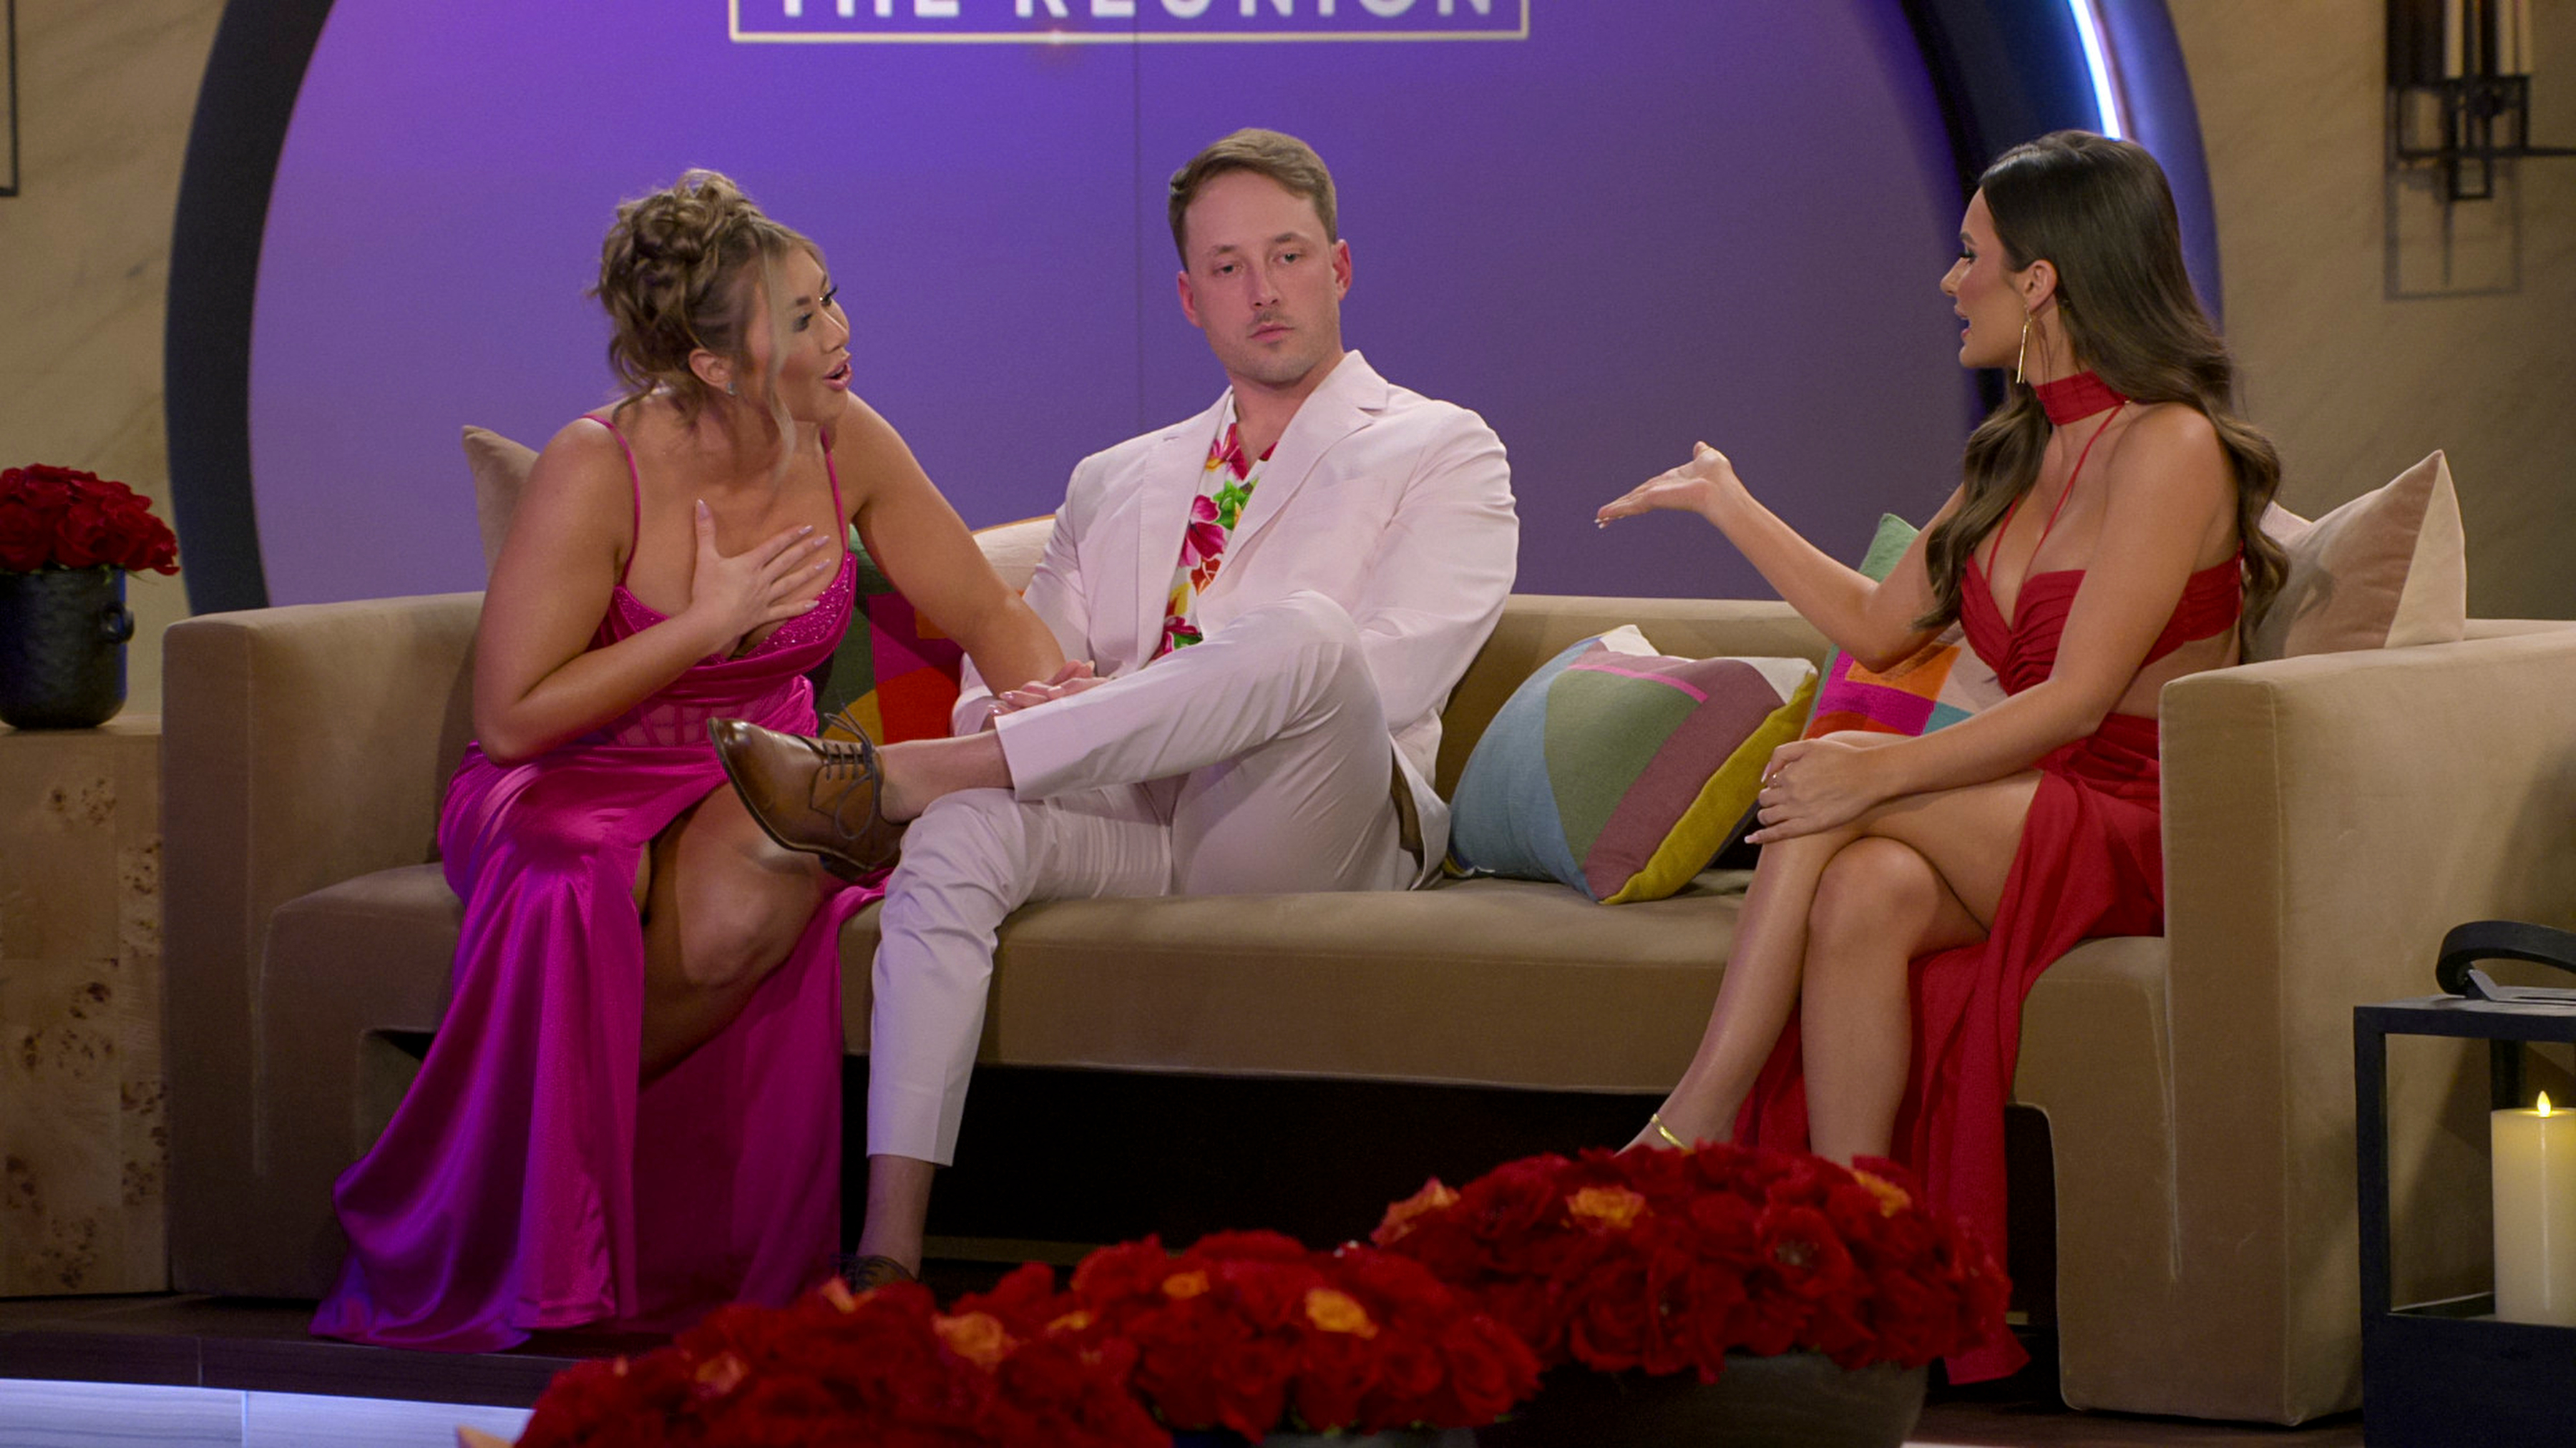 From left to right: Sarah Ann, Jeramy, and Jessica sitting on the couch during the Love is Blind season 6 reunion